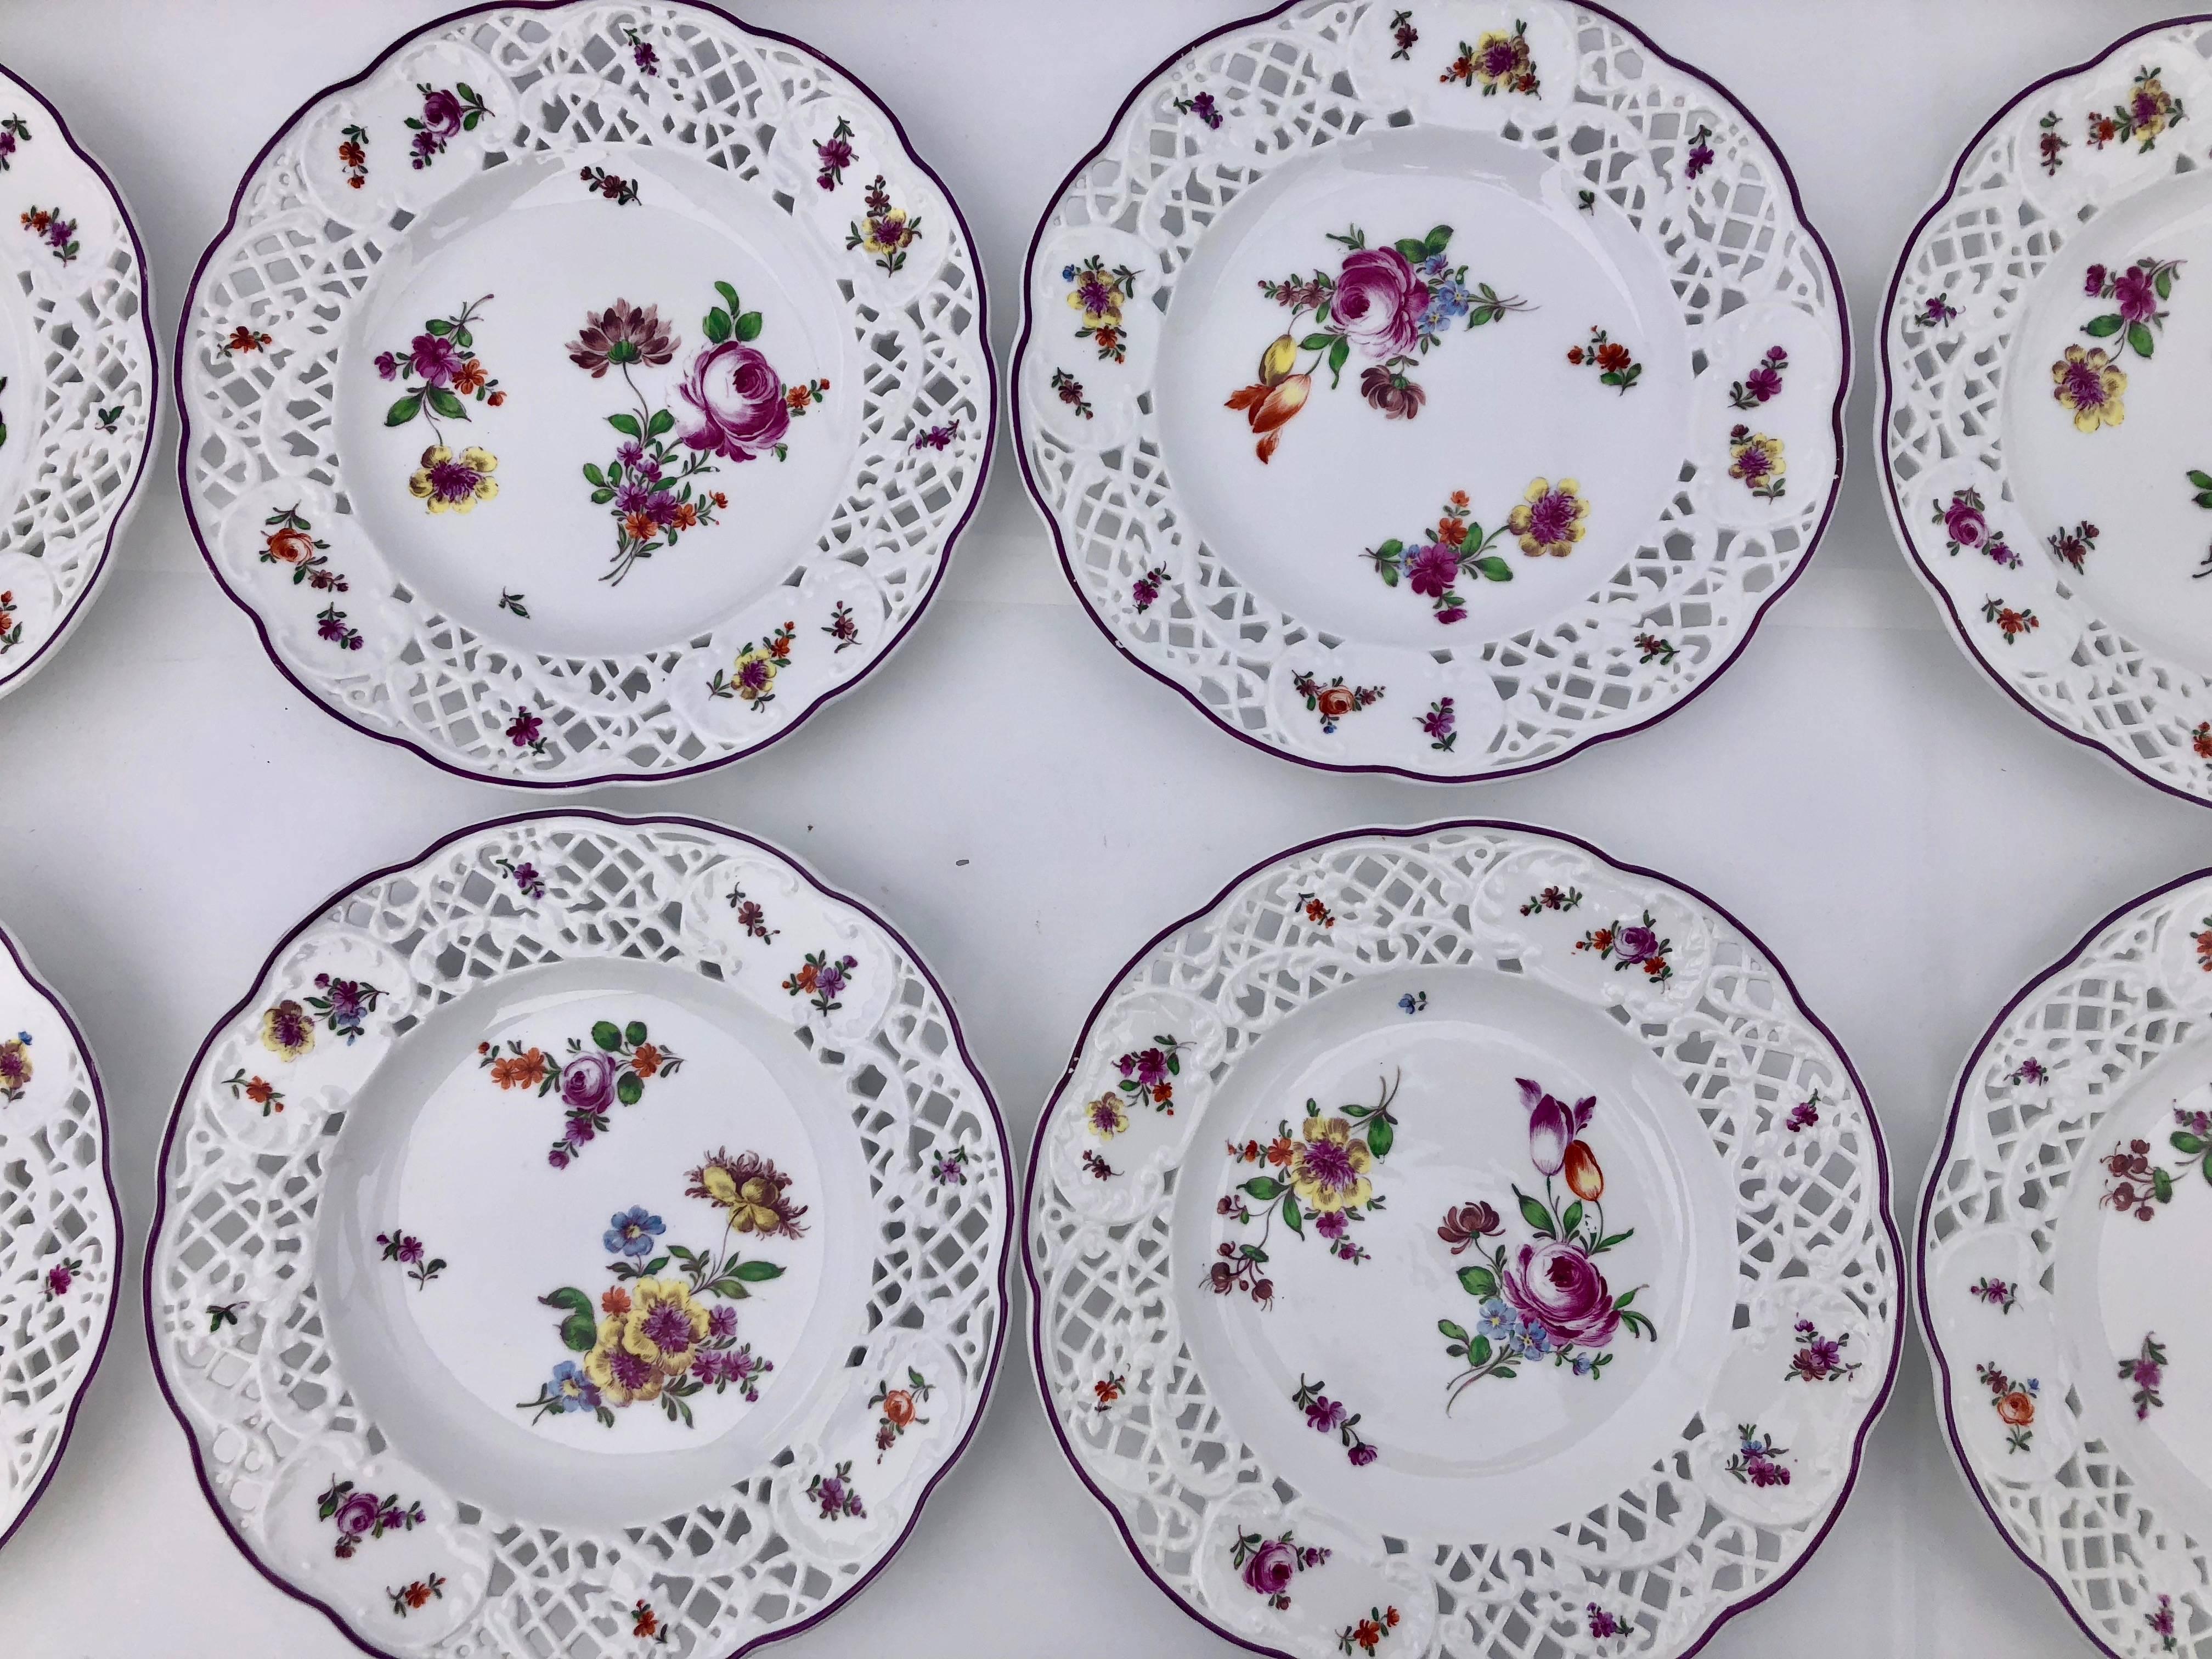 24 Meissen Plates with Reticulated Borders and Floral Decoration, Early 1900s im Angebot 2